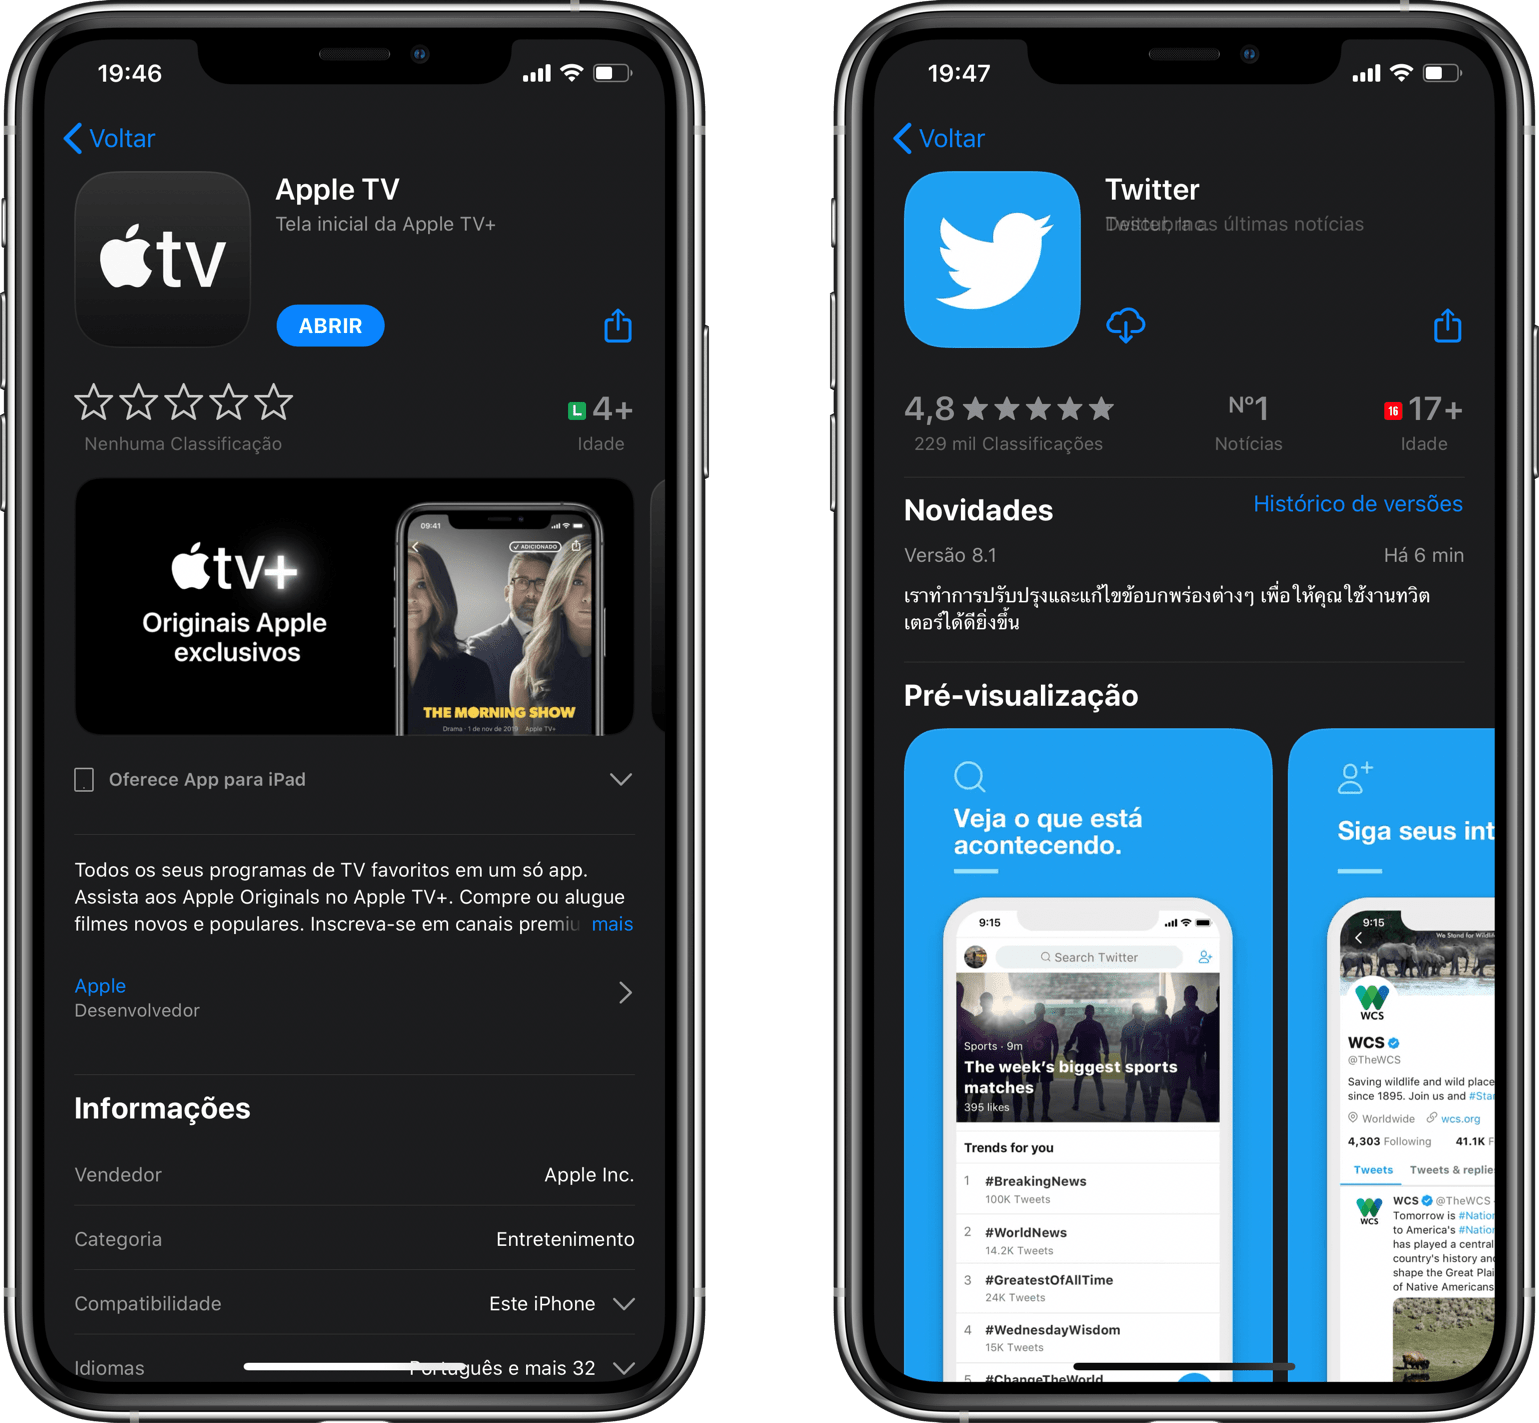 Age rating of Apple TV + and Twitter apps